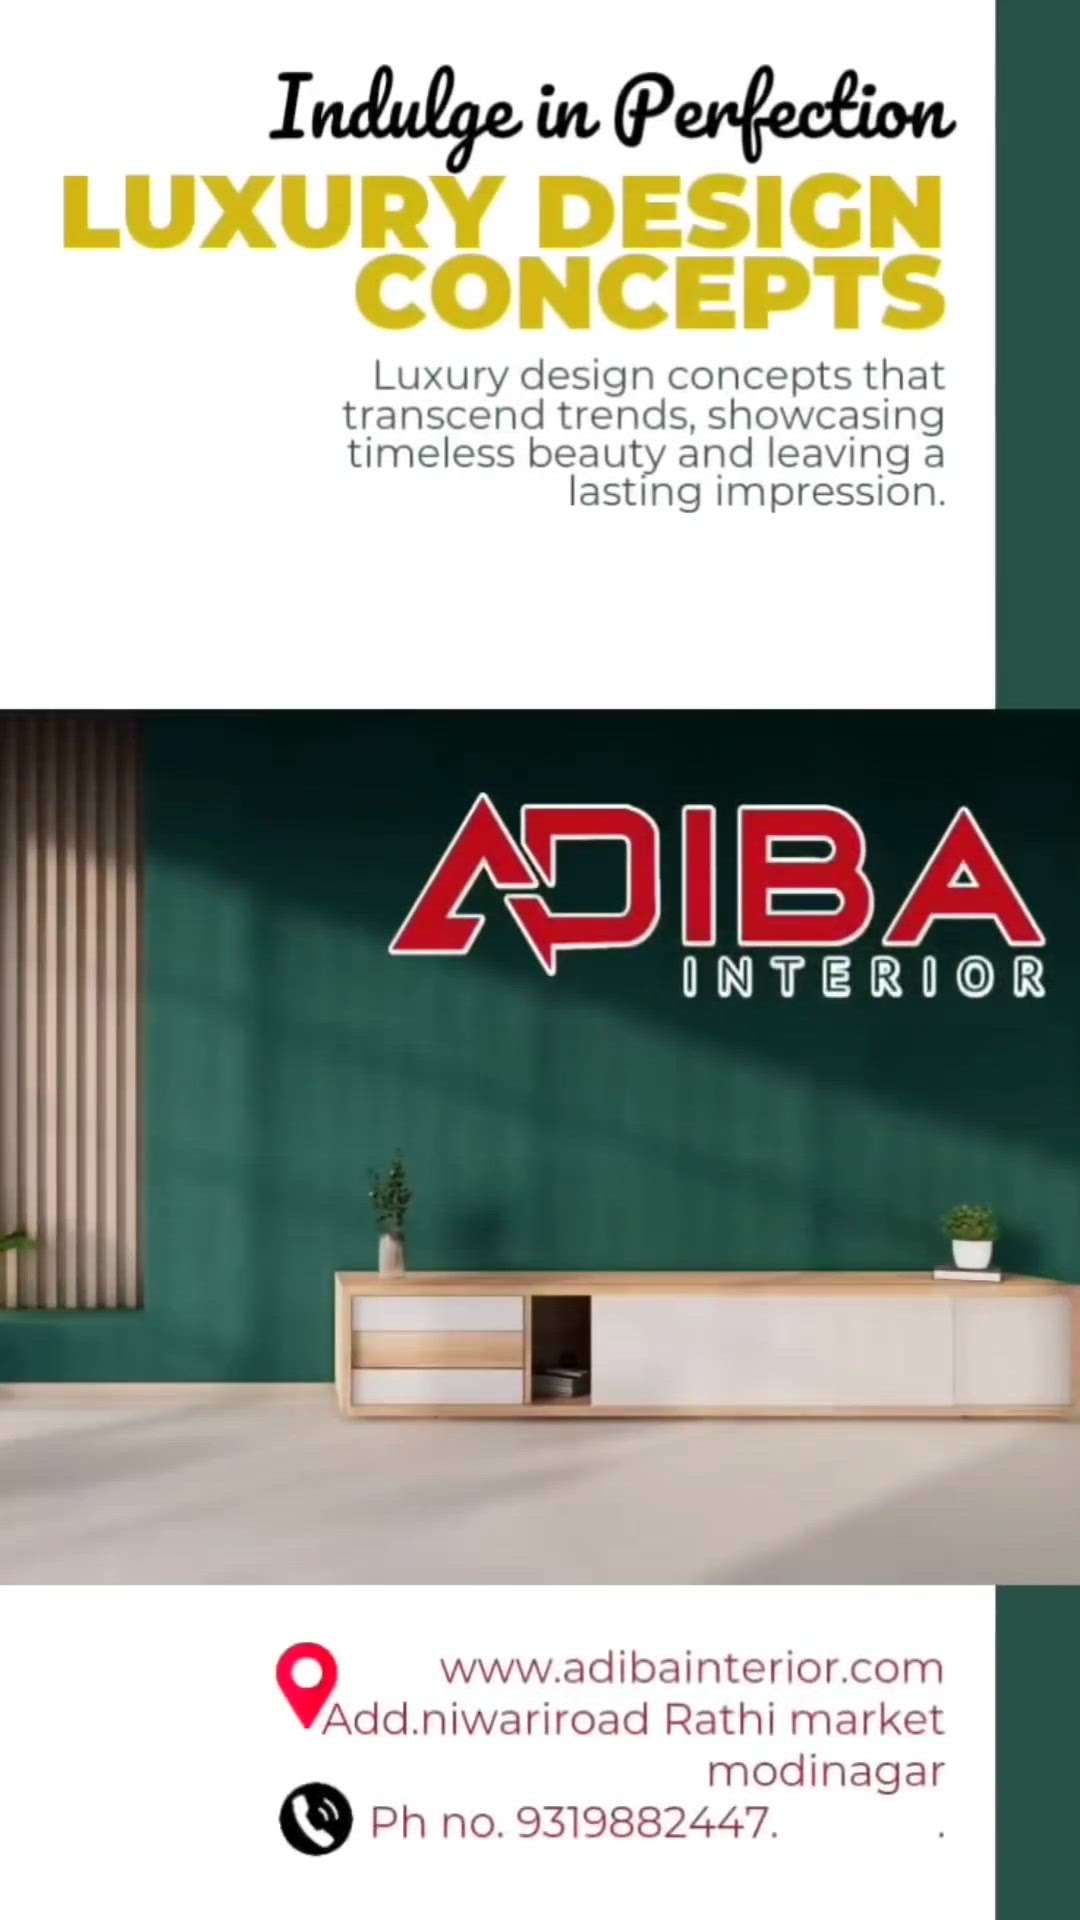 #adibainterior 𝐖𝐞 𝐚𝐫𝐞 𝐭𝐨𝐩 𝐬𝐞𝐥𝐥𝐞𝐫 𝐢𝐧 𝐋𝐨𝐮𝐯𝐞𝐫'𝐬 𝐩𝐚𝐧𝐞𝐥 𝐢𝐧 𝐈𝐧𝐝𝐢𝐚.𝐏𝐮𝐫𝐜𝐡𝐚𝐬𝐞 𝐡𝐢𝐠𝐡 𝐪𝐮𝐚𝐥𝐢𝐭𝐲 𝐖𝐏𝐂 𝐋𝐨𝐮𝐯𝐞𝐫𝐬 𝐩𝐚𝐧𝐞𝐥 𝐭𝐨 𝐞𝐧𝐡𝐚𝐧𝐜𝐞 𝐭𝐡𝐞 𝐛𝐞𝐚𝐮𝐭𝐲 𝐨𝐟 𝐲𝐨𝐮𝐫 𝐥𝐢𝐯𝐢𝐧𝐠 𝐚𝐫𝐞𝐚𝐬.
.
.
.
Modern touch 🏠
Eco friendly 🌳
Easy to clean 🧽
Fast to install 🛠️
Water resistant 💦
Available in several textures
Visit us and check our collection of WPC Wall Panels

Contact us for more information and we will be more than glad to assist you 👇🏻

𝐅𝐨𝐫 𝐦𝐨𝐫𝐞 𝐢𝐧𝐟𝐨, 𝐩𝐥𝐞𝐚𝐬𝐞 𝐜𝐚𝐥𝐥/ 𝐭𝐞𝐱𝐭 𝐮𝐬; 𝐎𝐫𝐝𝐞𝐫 𝐧𝐨𝐰!!!

𝘈𝘭𝘭 𝘪𝘯𝘵𝘦𝘳𝘪𝘰𝘳 𝘚𝘰𝘭𝘶𝘵𝘪𝘰𝘯𝘴 & 𝘏𝘰𝘮𝘦 𝘋𝘦𝘤ore
📦 Product/Service: PVC Panels, Wallpapers, Artificial Grass, UV sheets and Many More.
📲 Call : 9319882447 interioradiba@gmail.com
🏬 Walk In niwari  𝐫𝐨𝐚𝐝, 𝐌𝐨𝐝𝐢𝐧𝐚𝐠𝐚𝐫, 𝐔𝐭𝐭𝐚𝐫 𝐏𝐫𝐚𝐝𝐞𝐬𝐡 𝟐𝟎𝟏𝟐𝟎4

#ceilings #architecture #adibainterior #ceilingdesign #interiordesign #interior #interiordecore #decor #panels #louvers #F